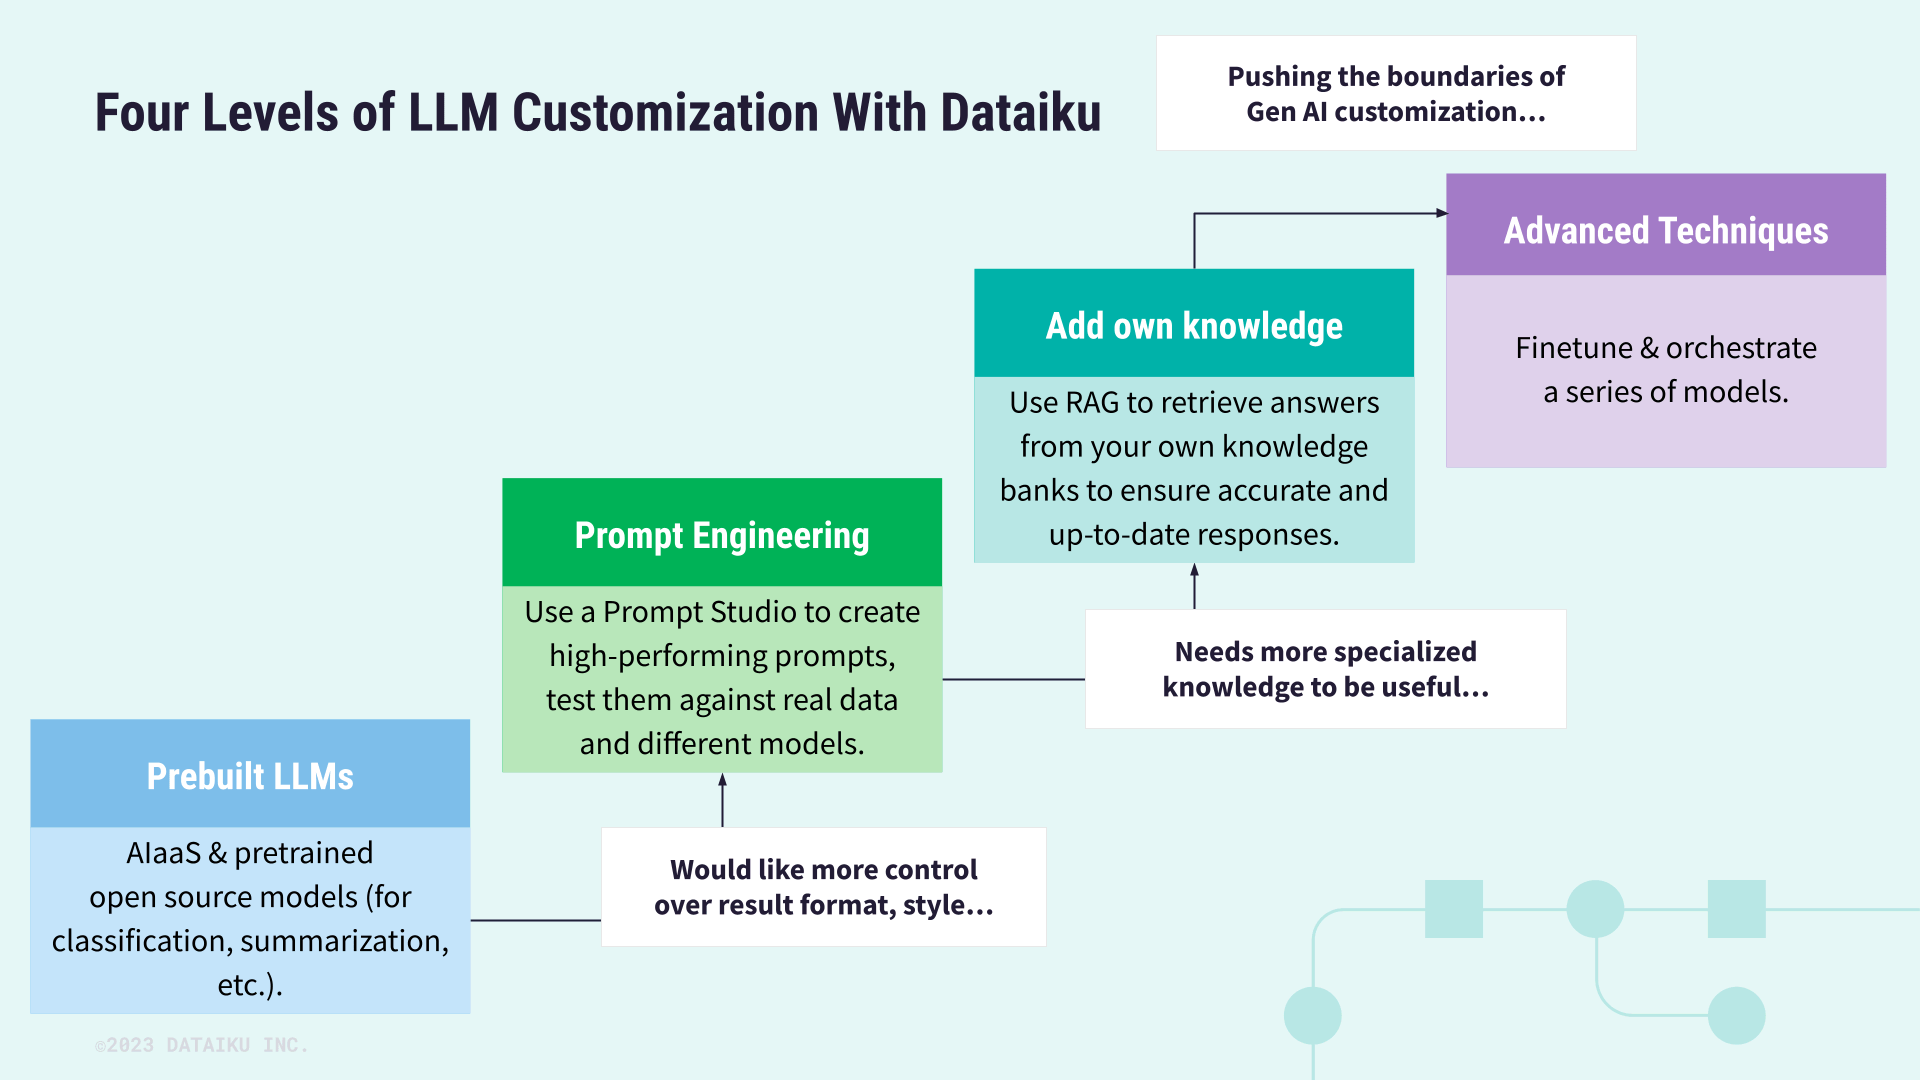 Diagram showing the four levels of LLM customization with Dataiku.